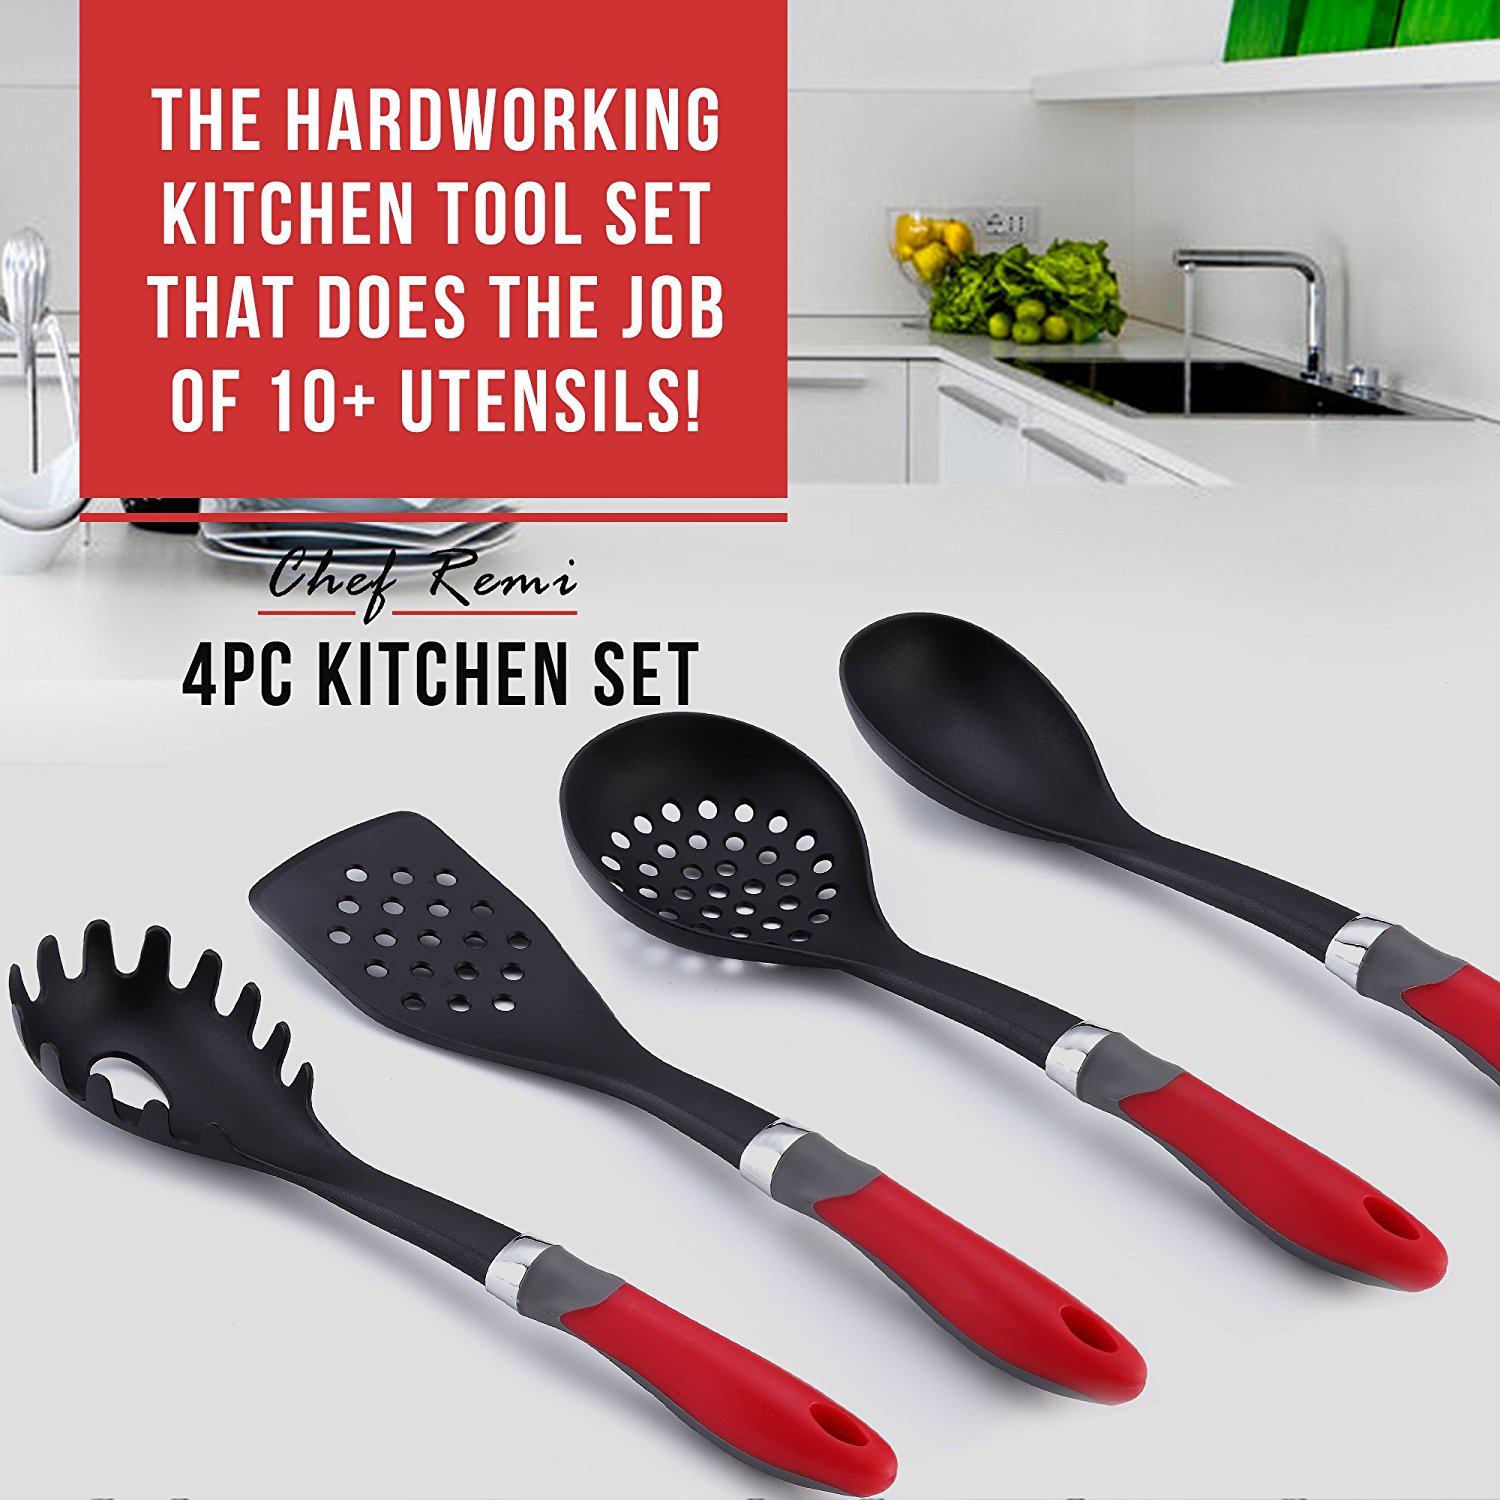 Buy These 4 Useful Kitchen Tools At Once, Since This Set Is On Sale For